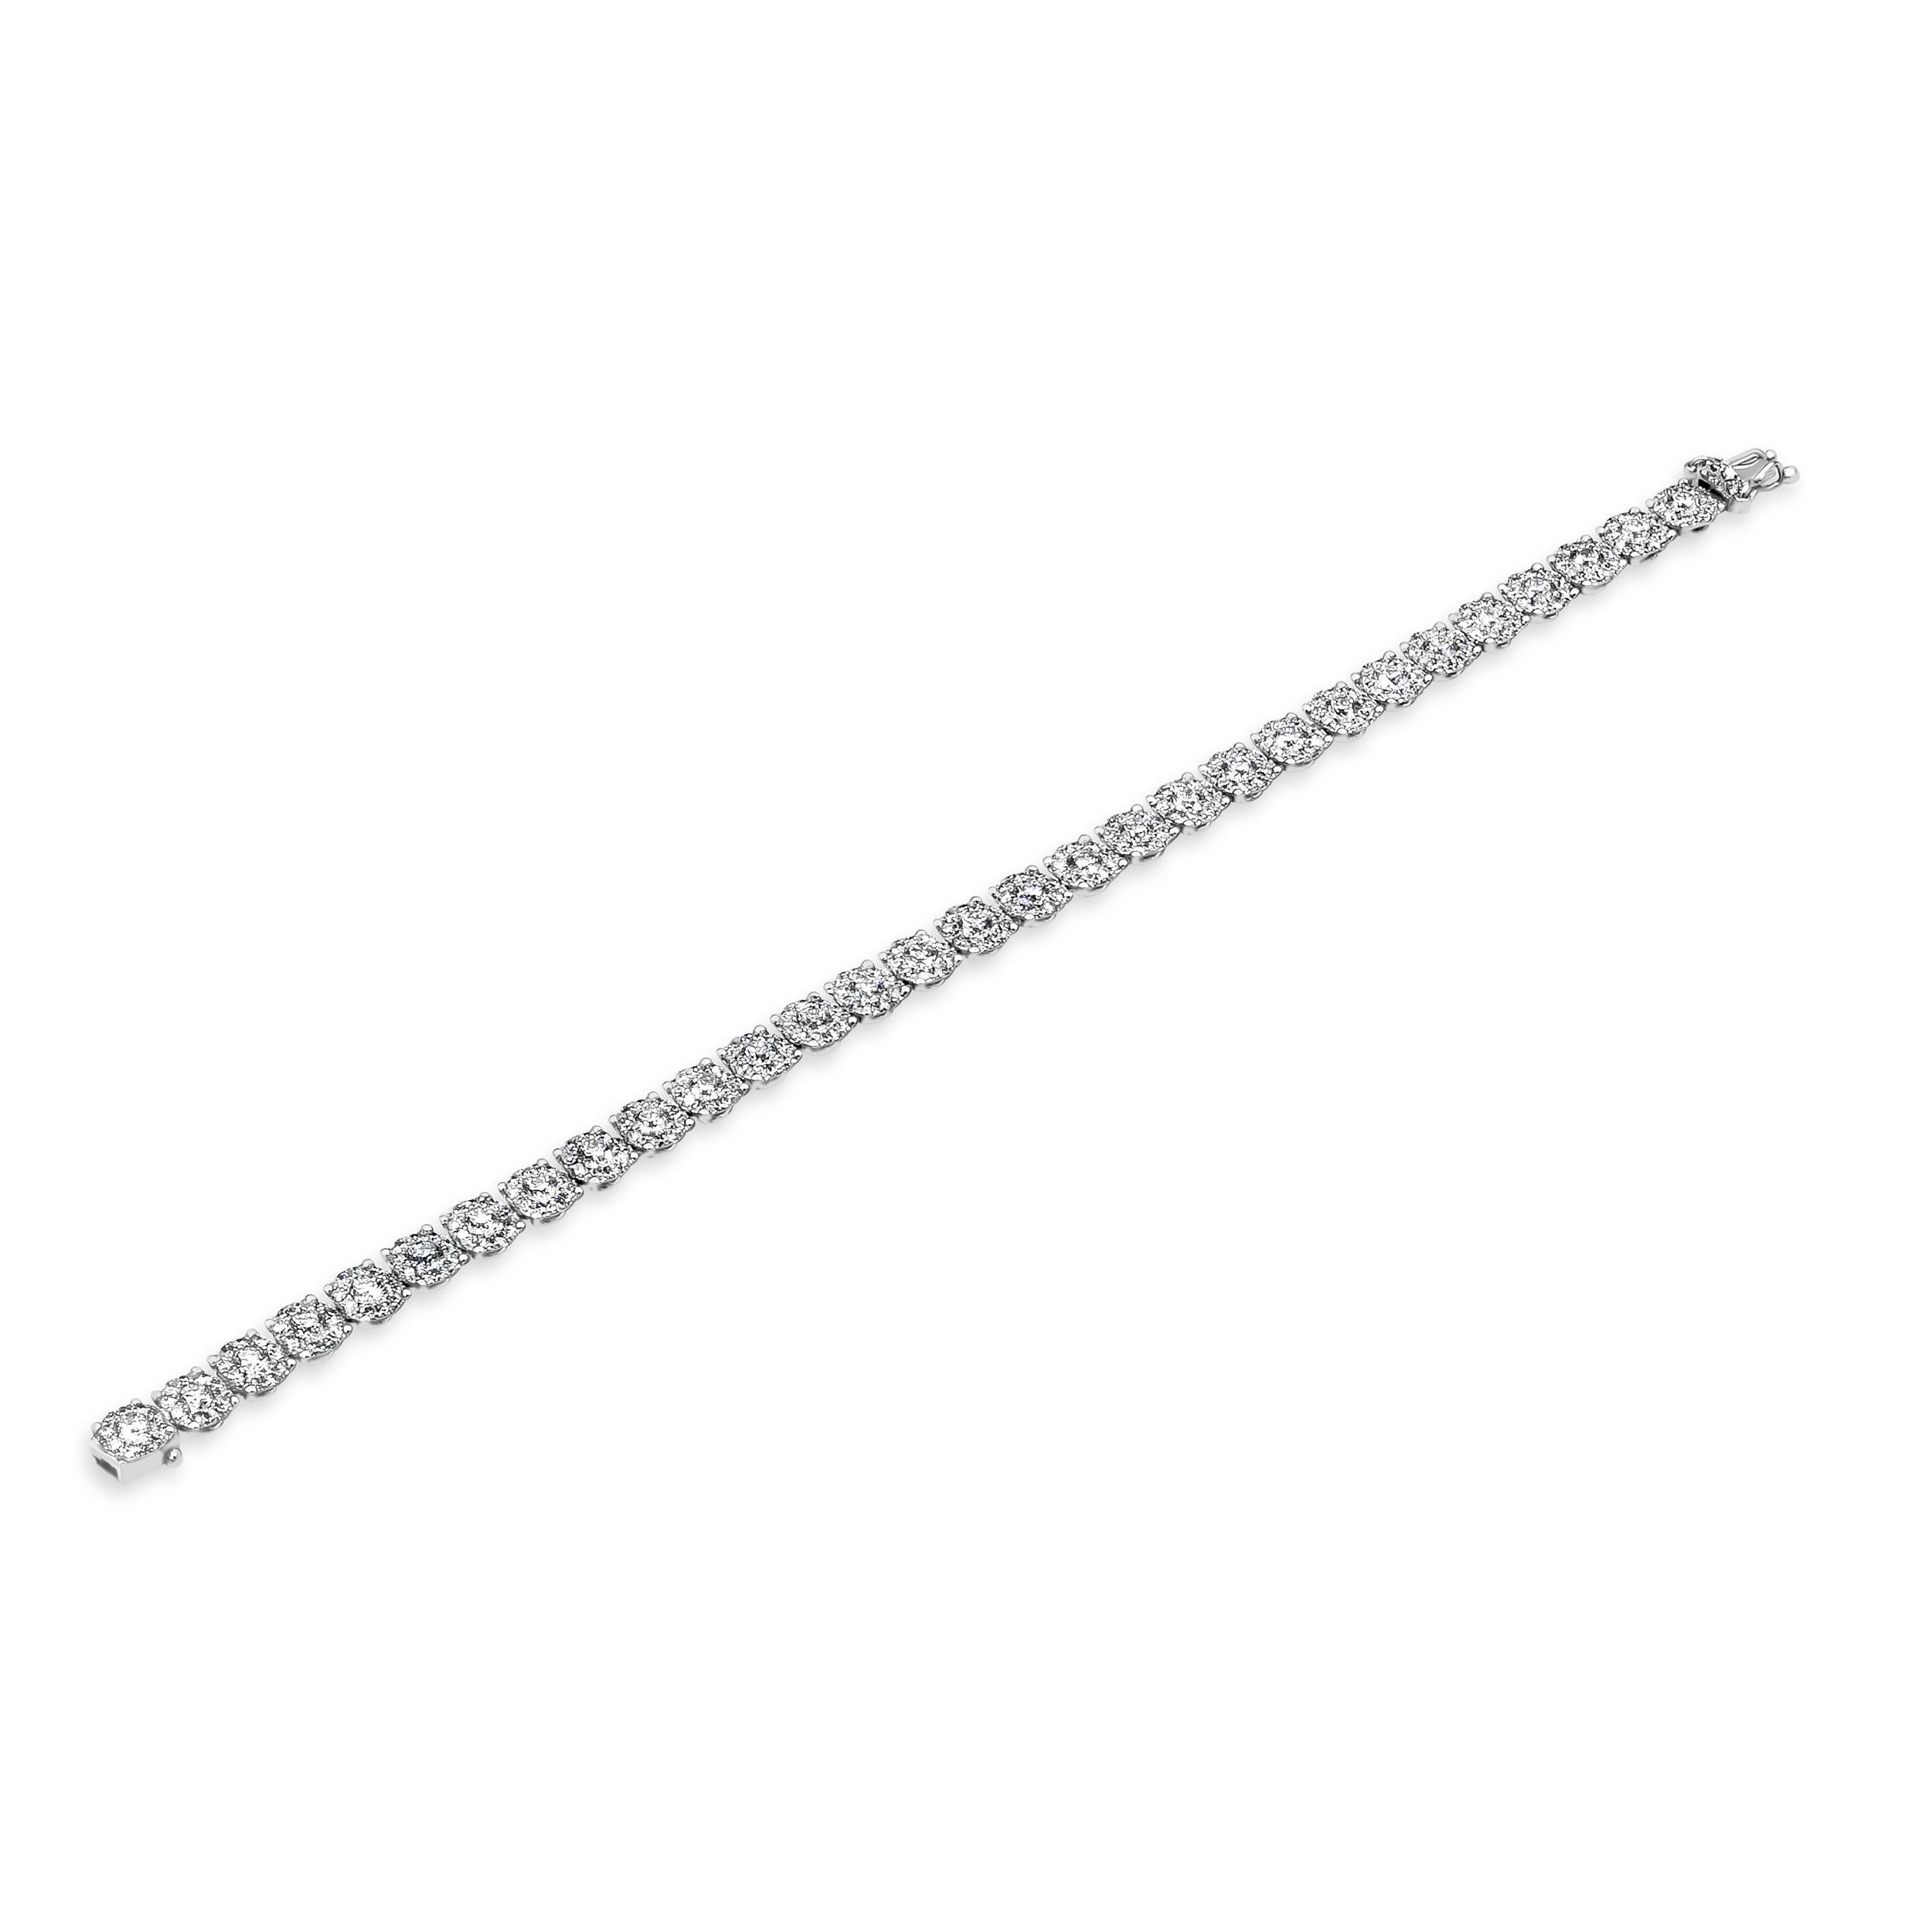 A brilliant tennis bracelet showcasing a cluster of round diamonds to give the illusion of single large diamonds. Diamonds weigh 5.86 carats total. Made in 18 karat white gold.

